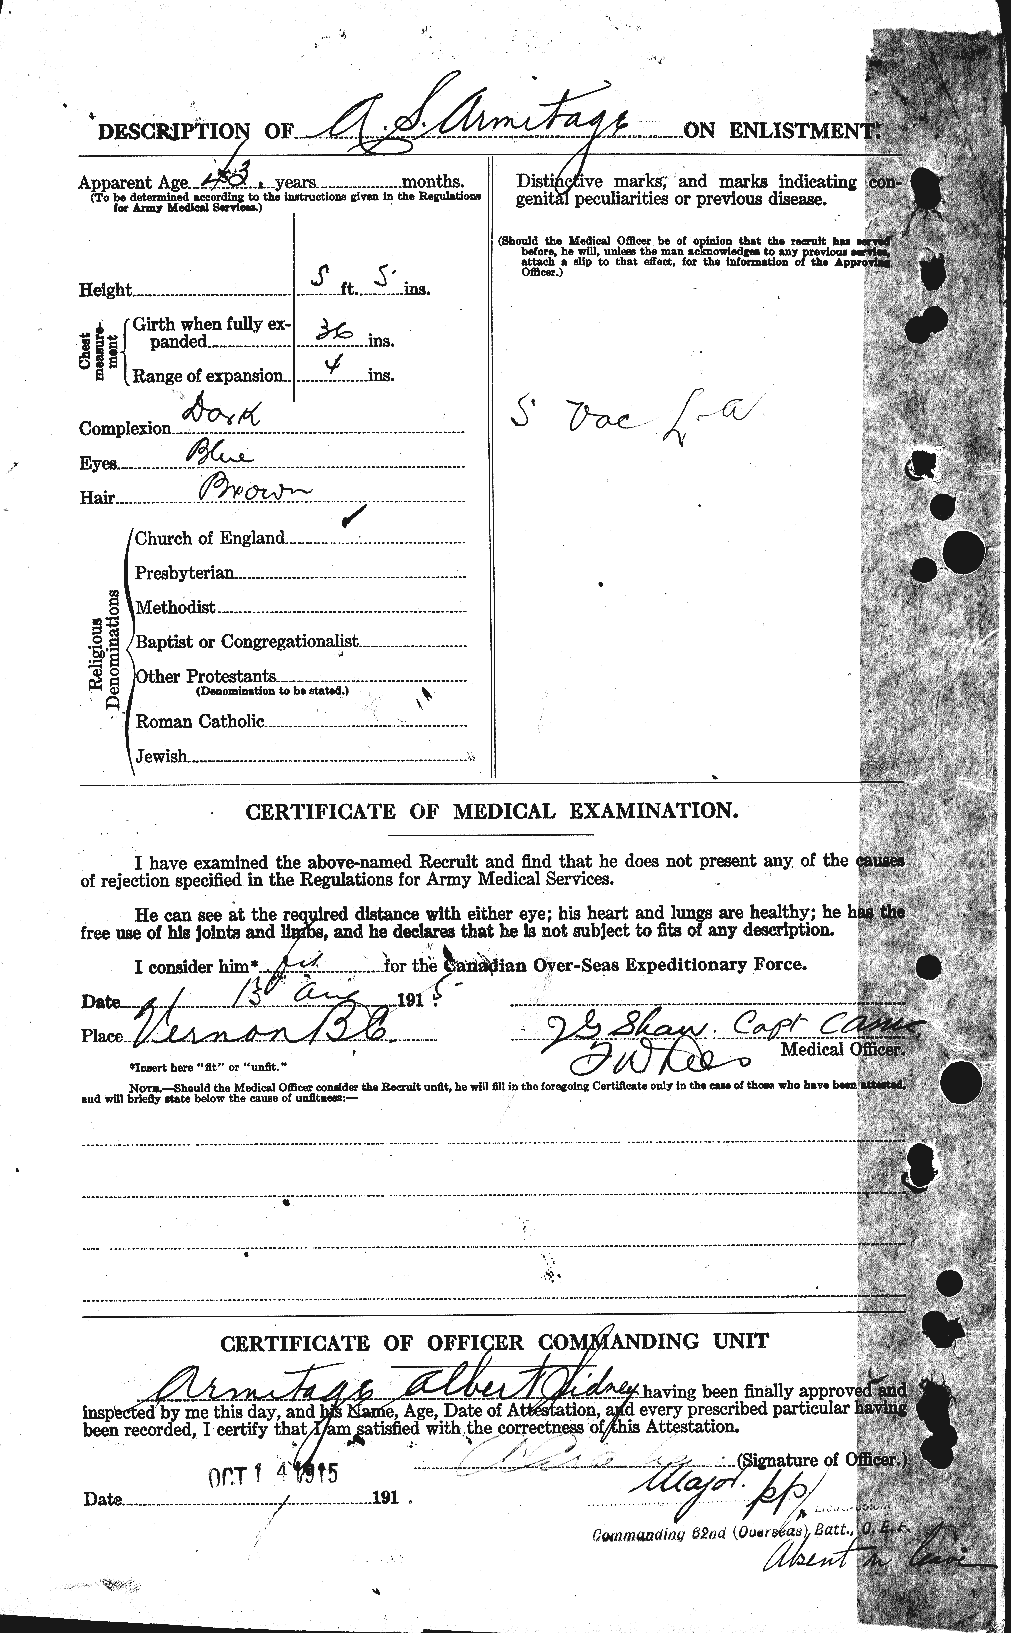 Personnel Records of the First World War - CEF 213449b